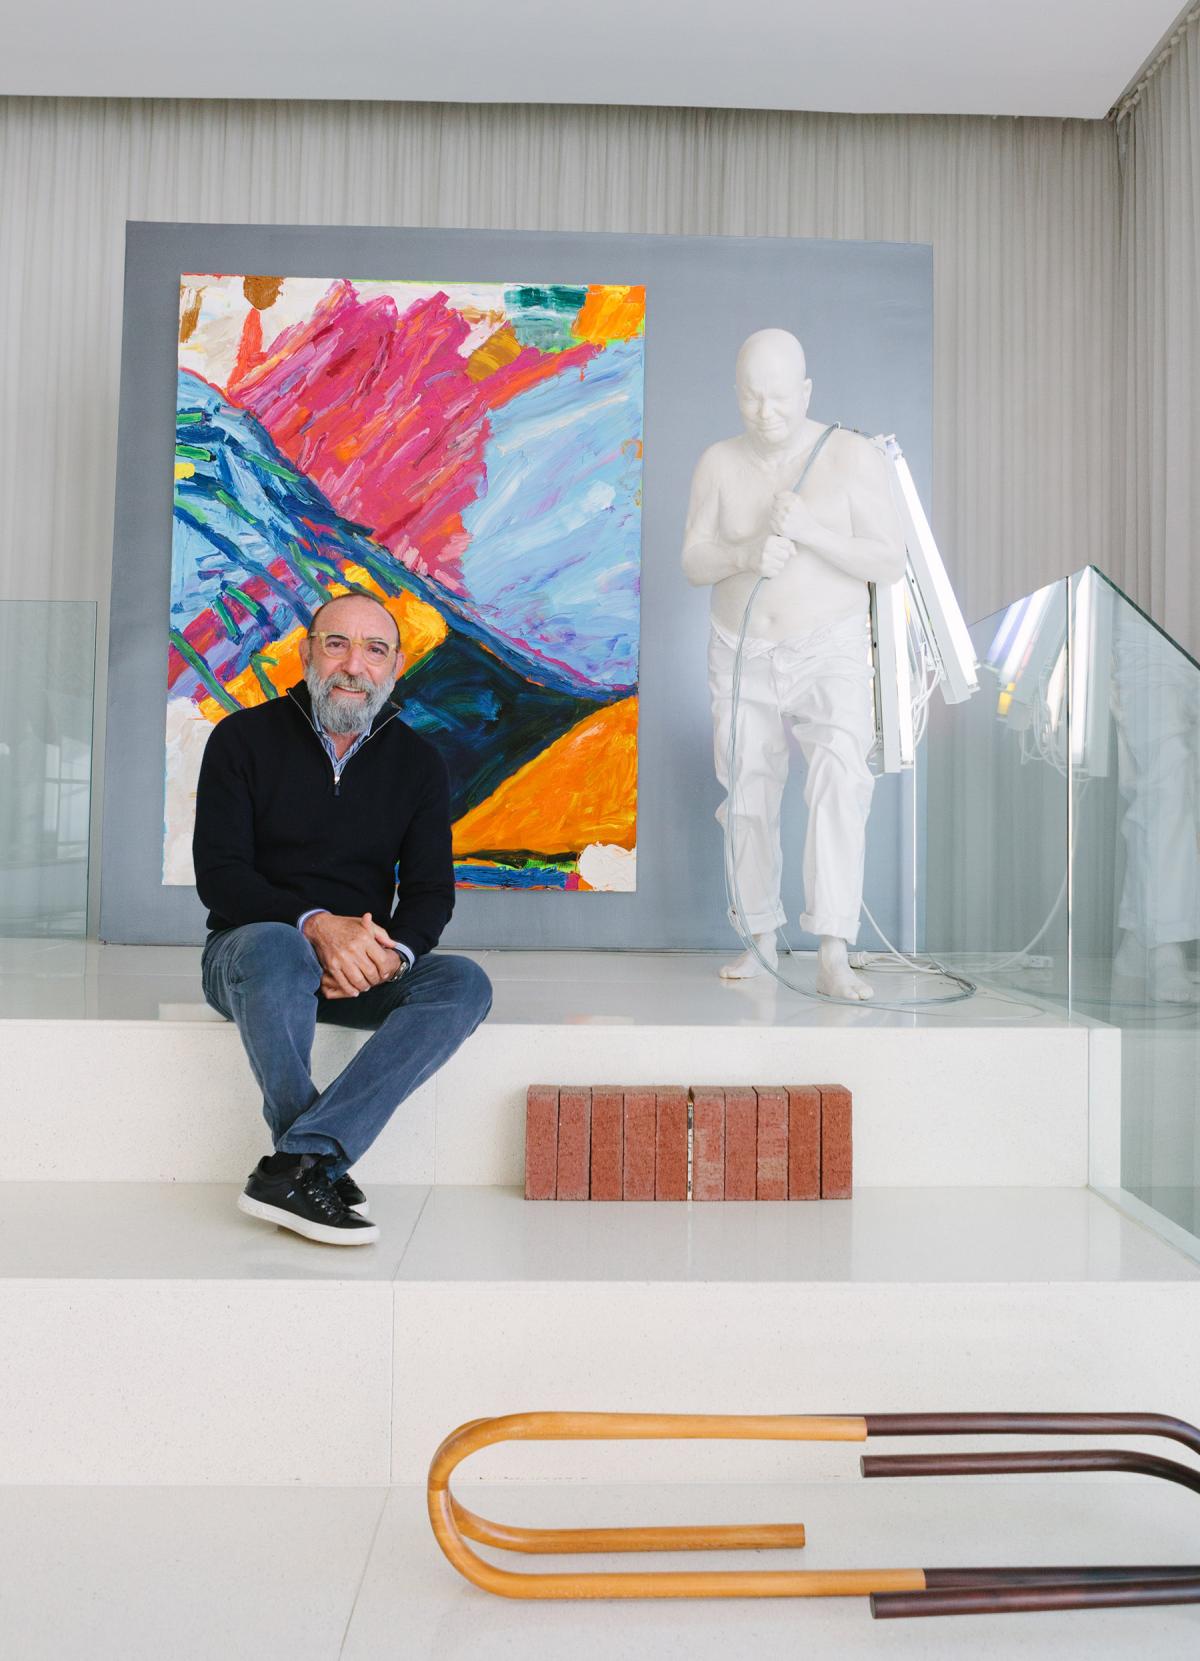 Dani Levinas sitting in his home surrounded by art